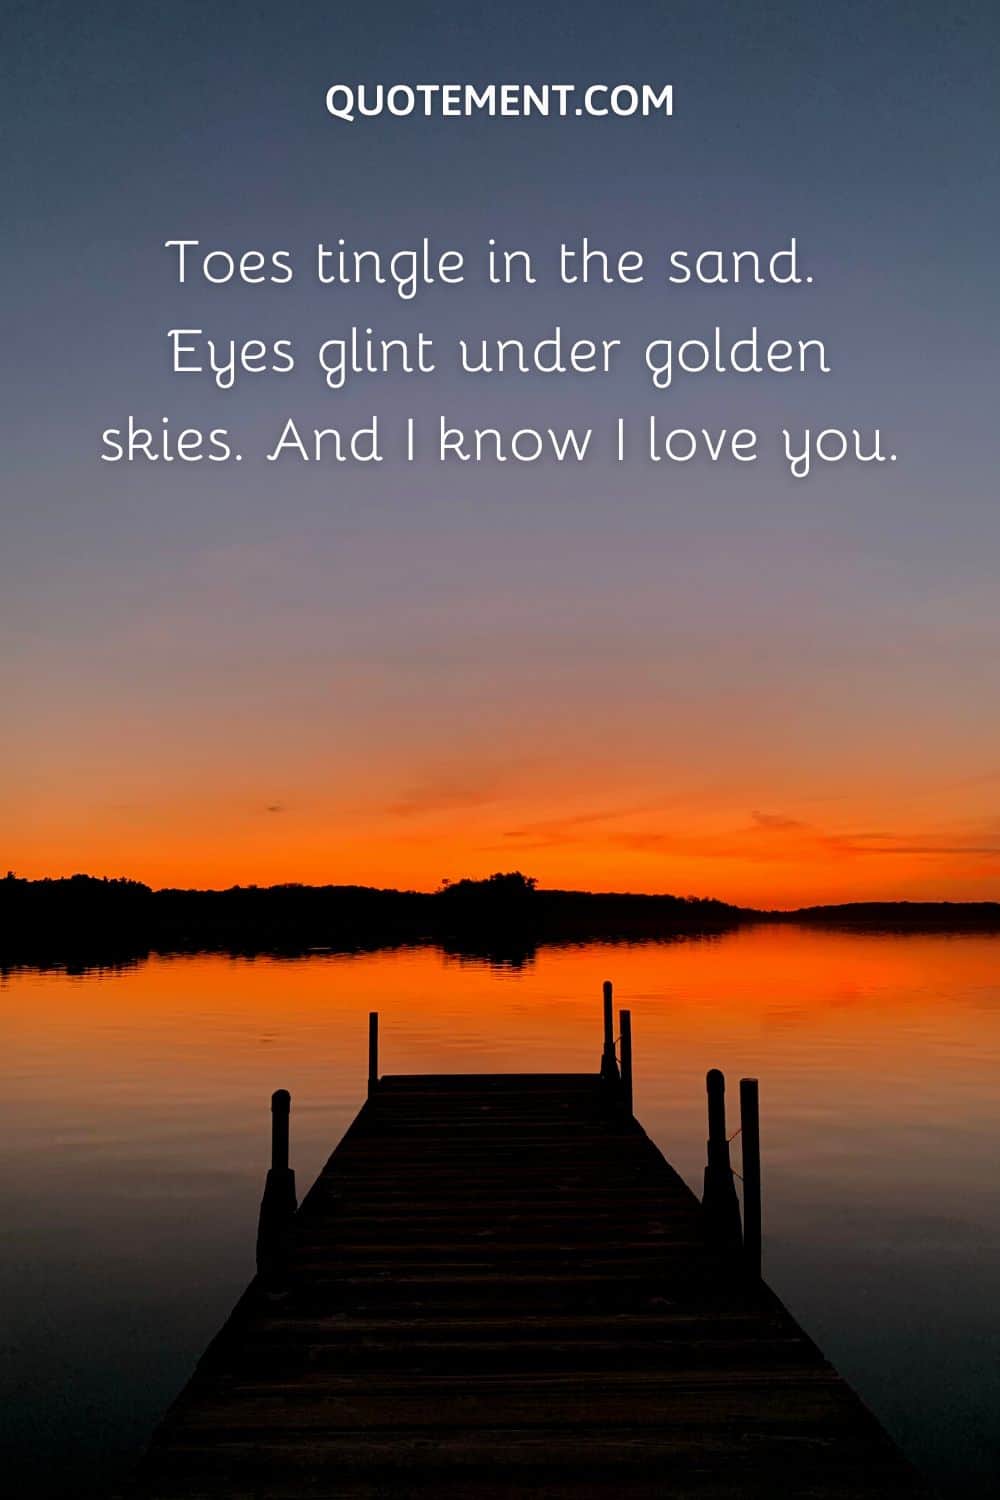 Toes tingle in the sand. Eyes glint under golden skies. And I know I love you.